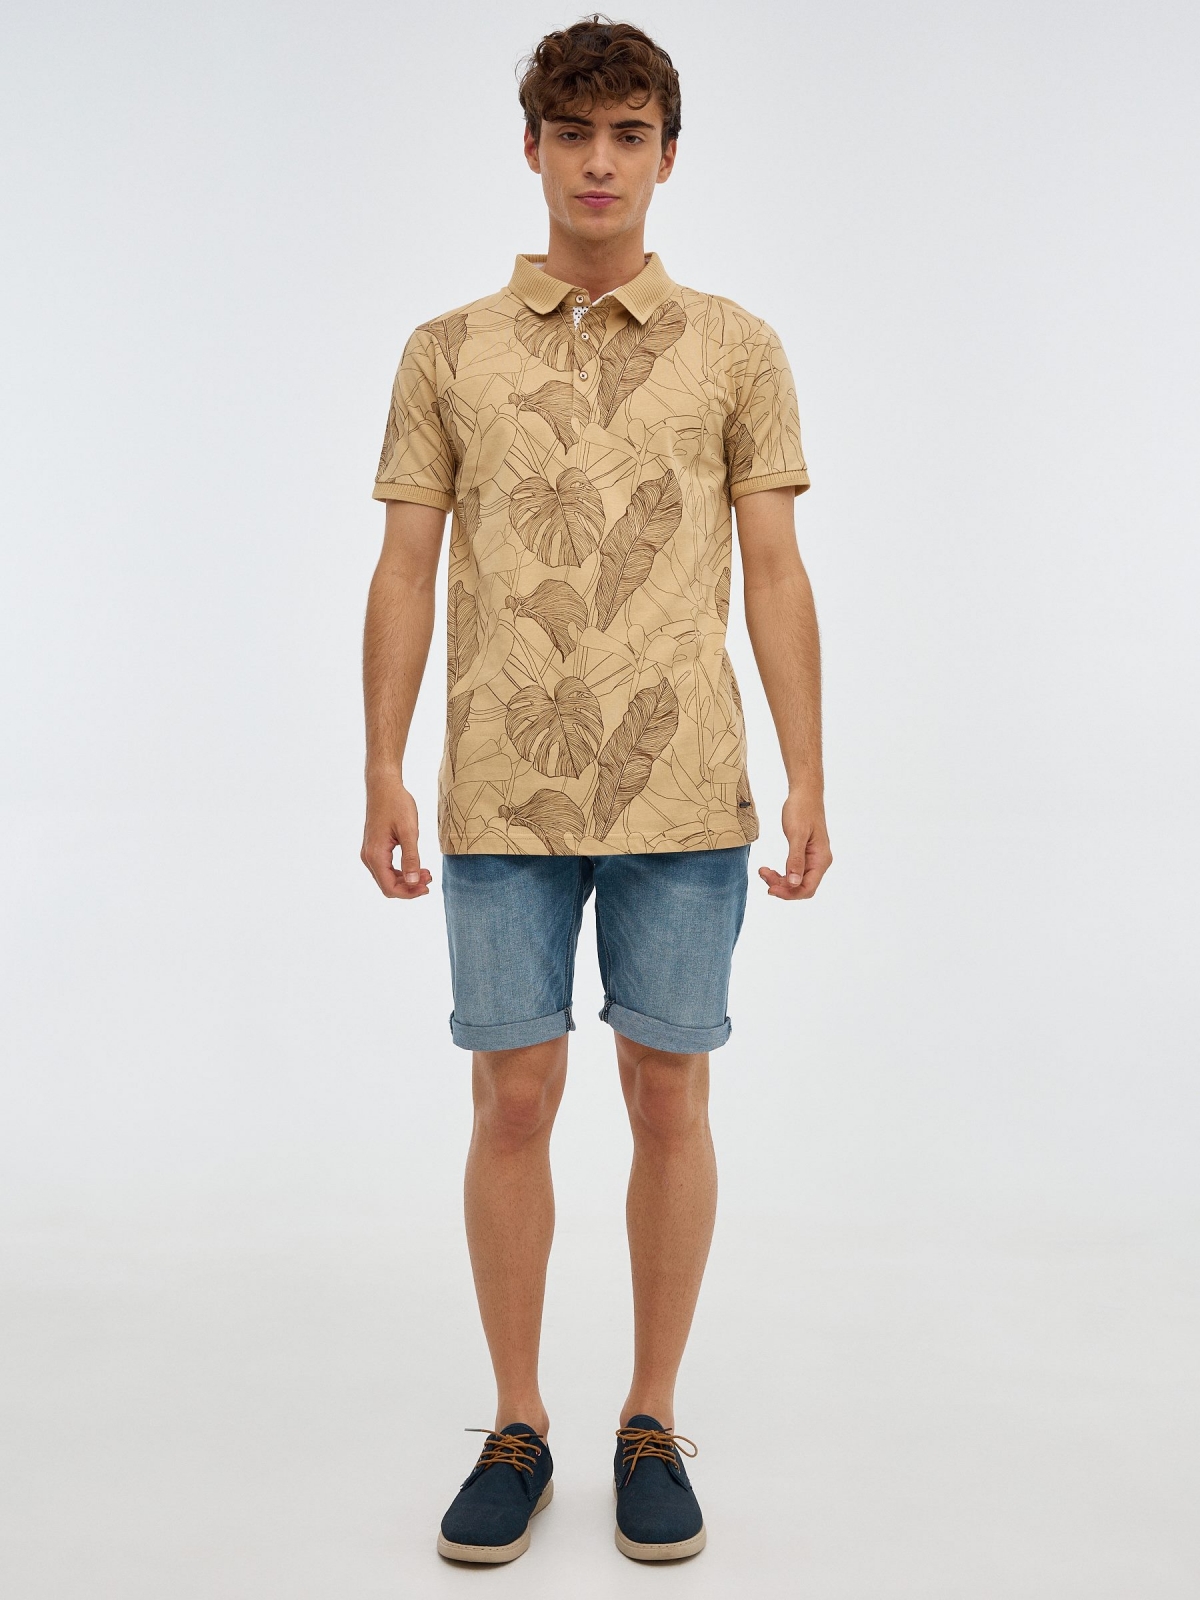 Floral print polo shirt earth brown front view